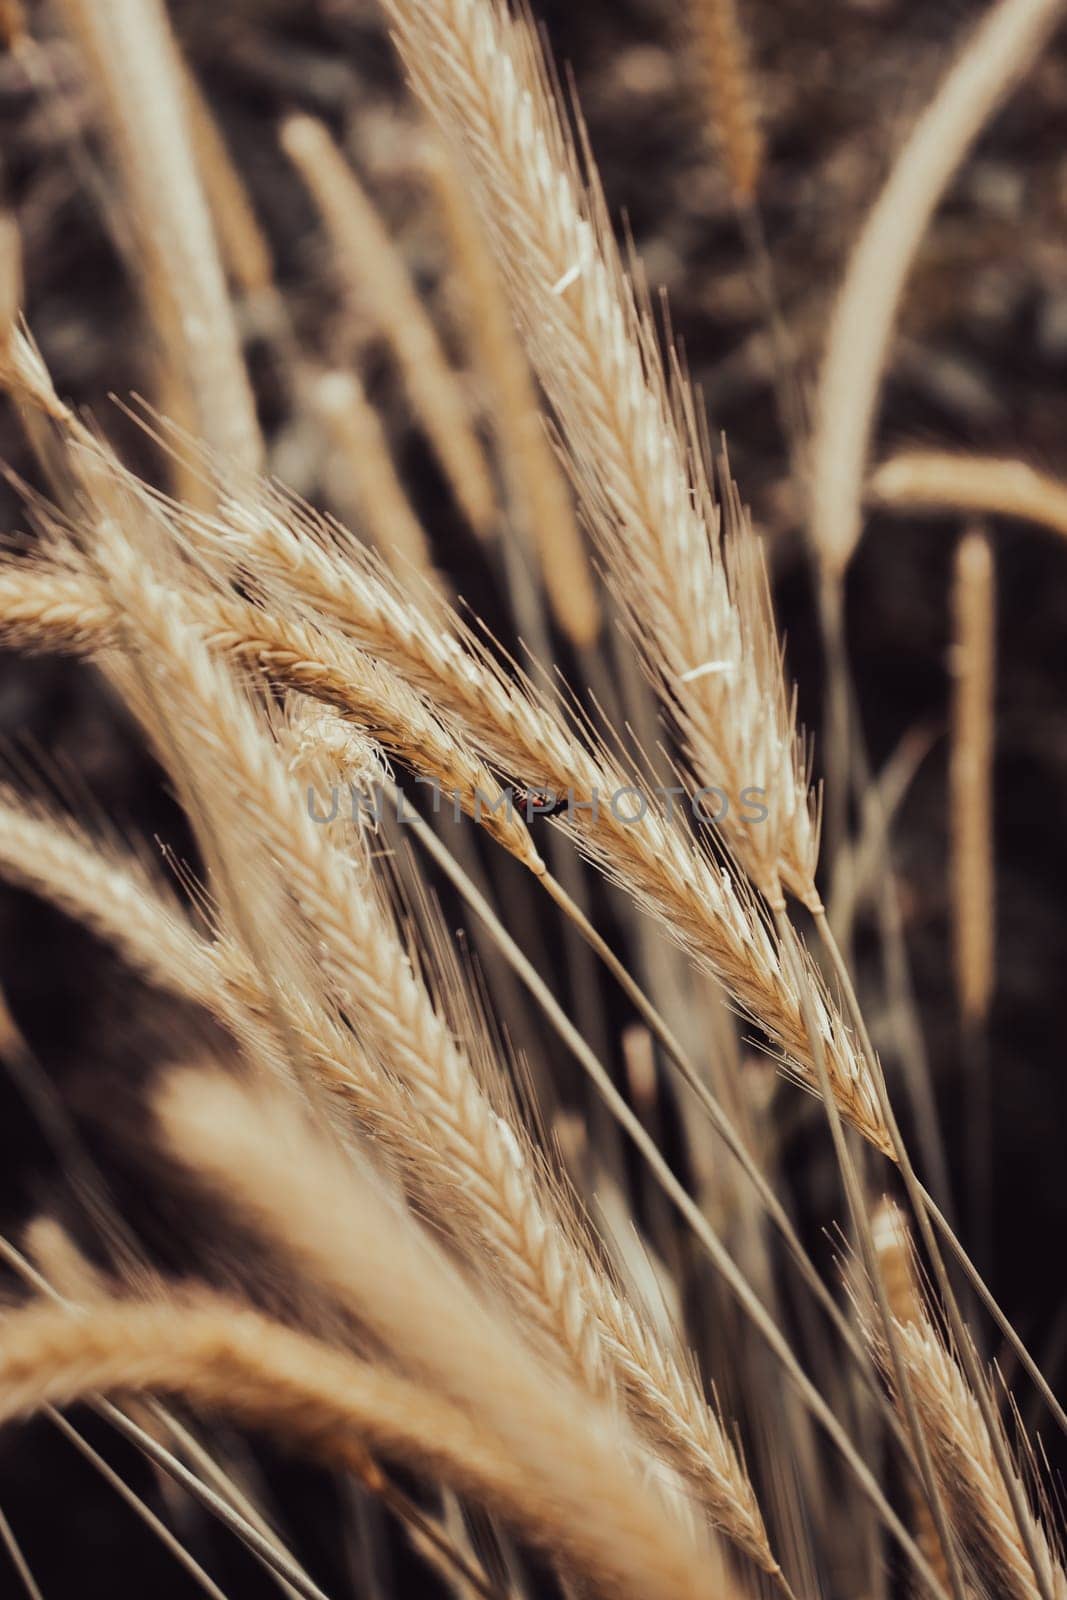 Wheat field - ears of golden wheat close-up photo. by _Nataly_Nati_